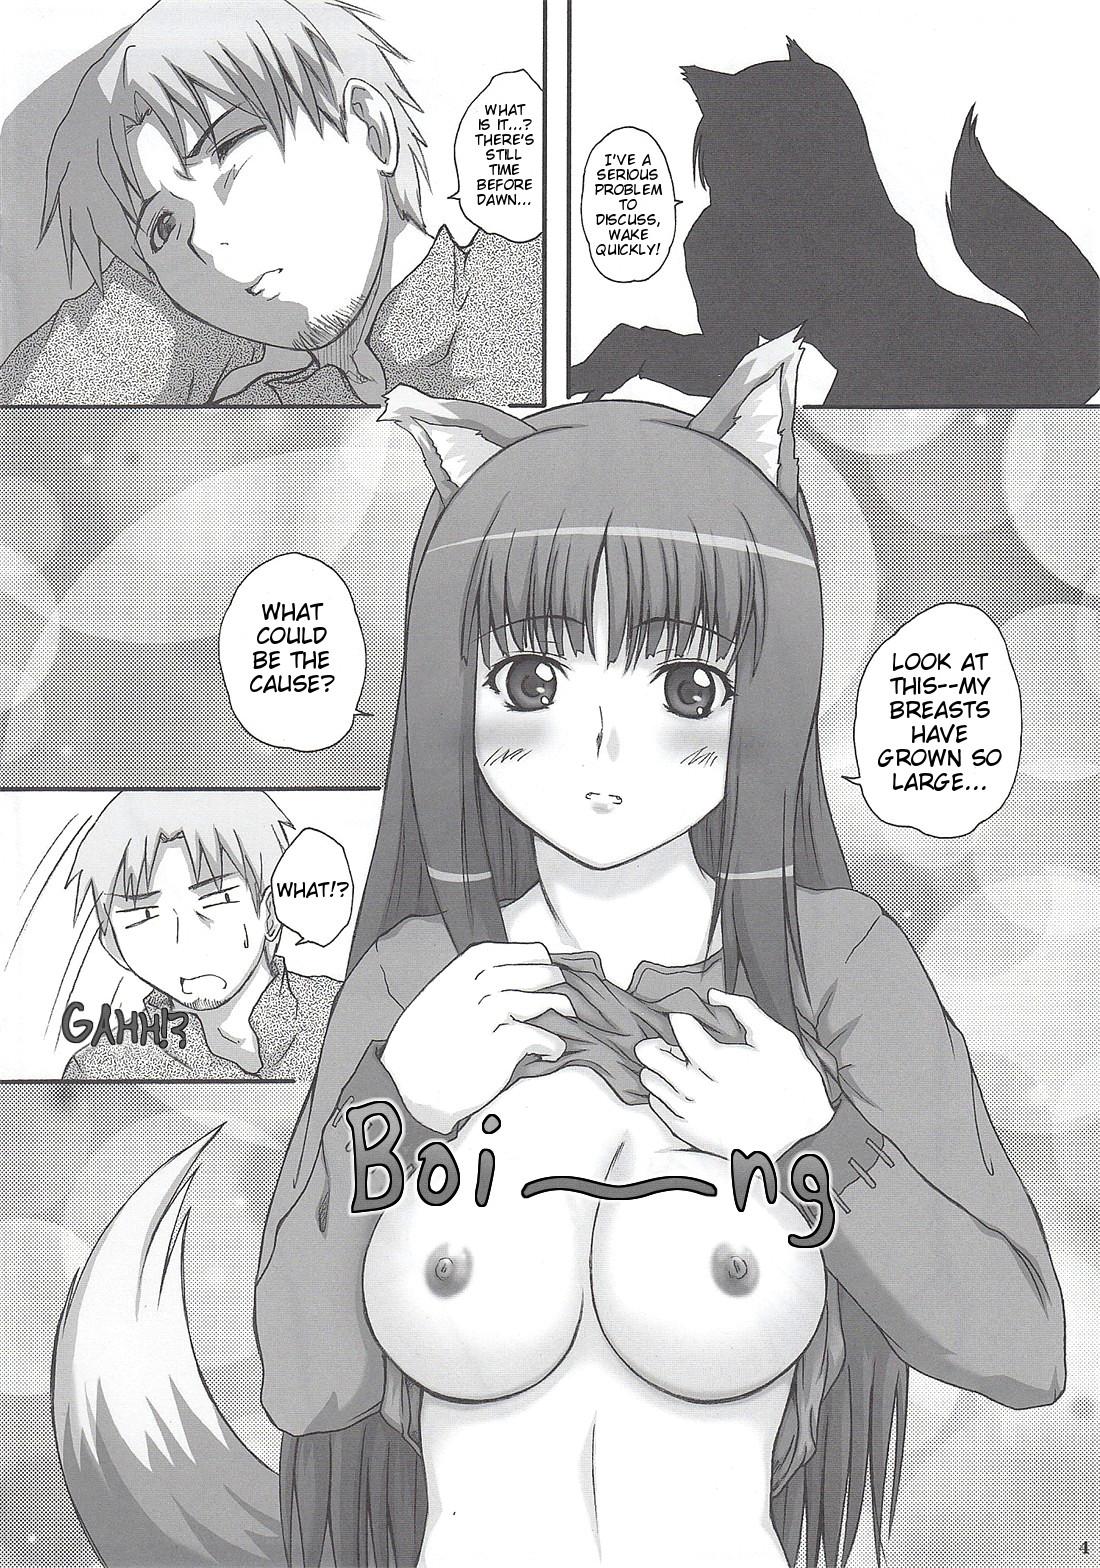 Best Blowjobs 2Stroke TY - Spice and wolf Pelada - Page 3